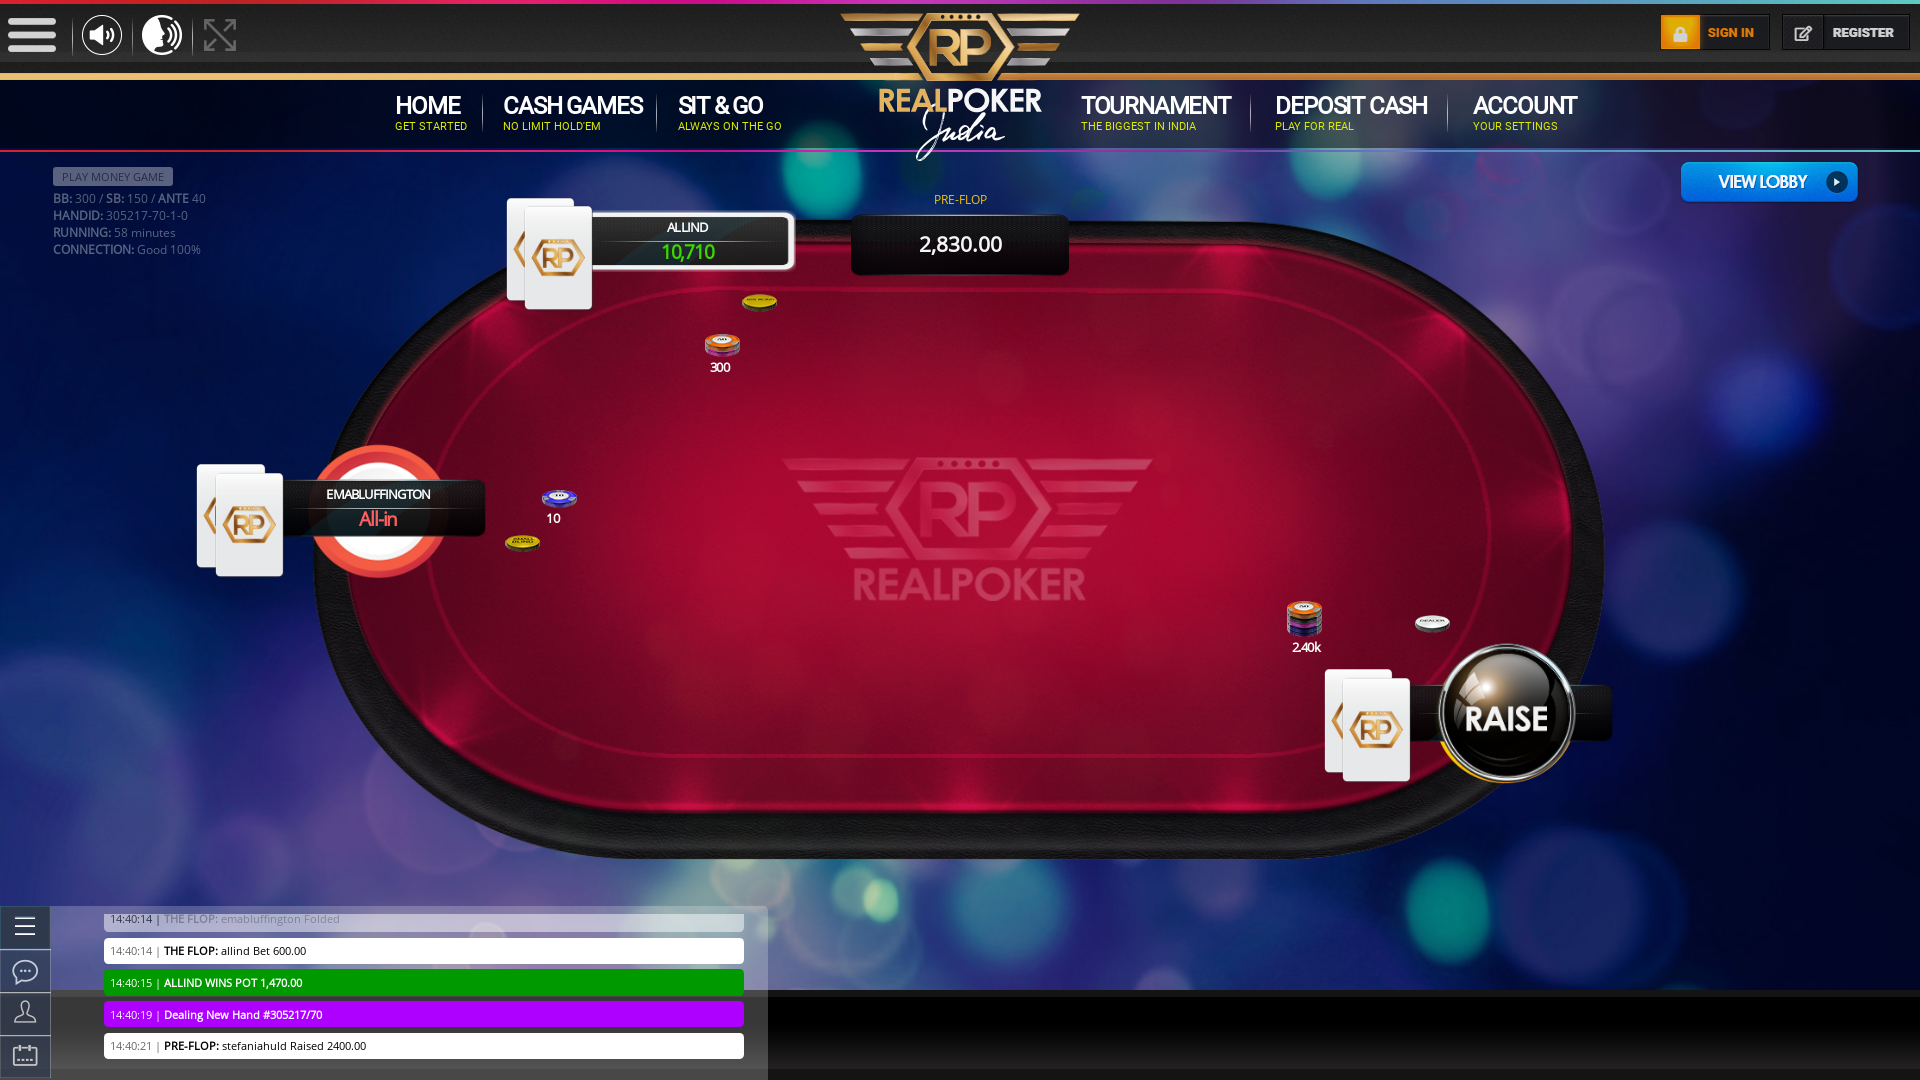 Indian online poker on a 10 player table in the 58th minute match up